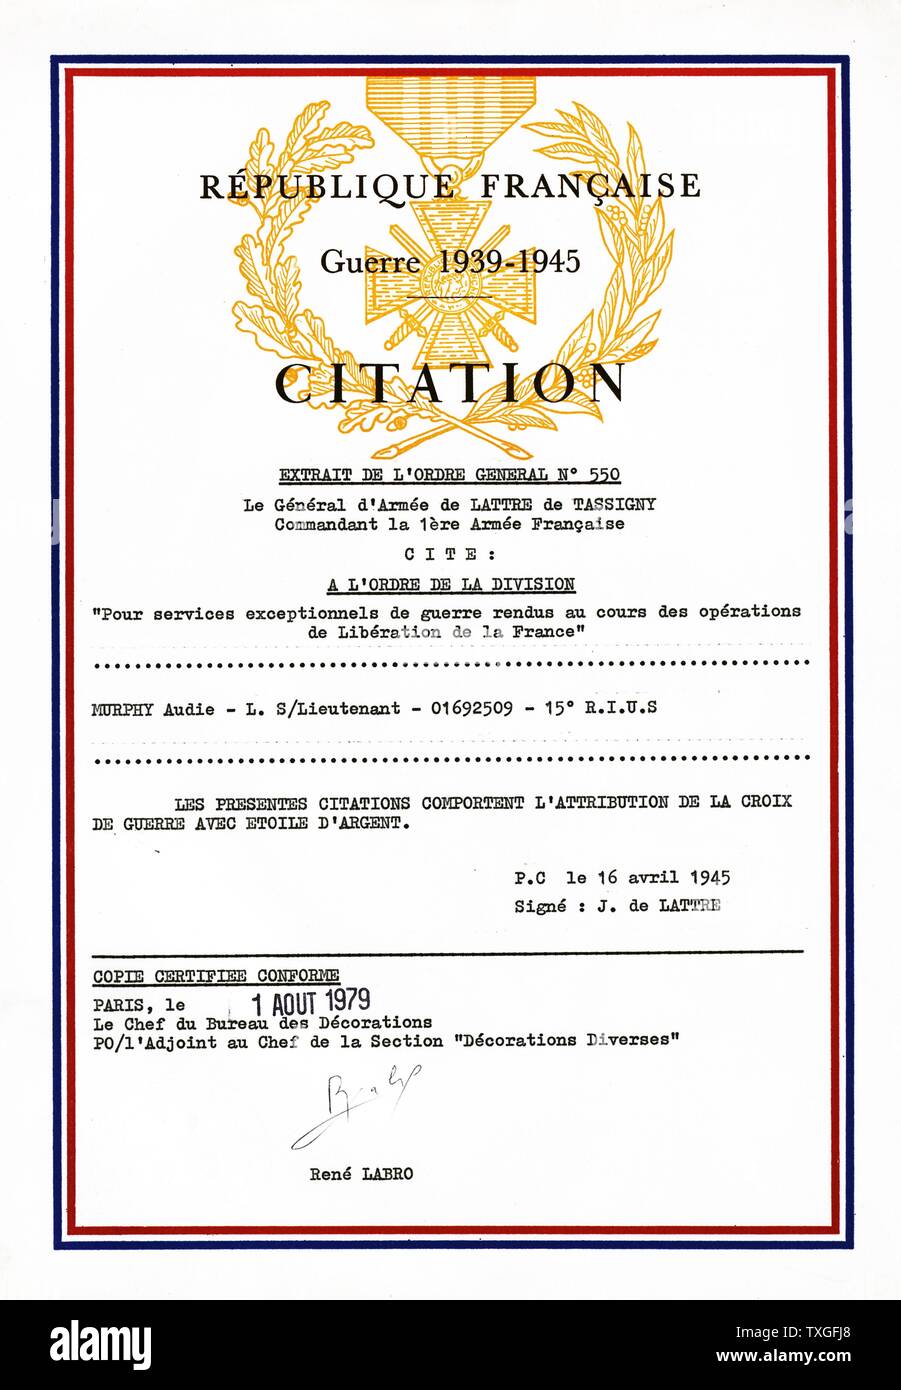 Certificate confirming the award to Audie Murphy by France, of the Croix de guerre with Silver Star Medal 1945. Audie Leon Murphy (20 June 1925 – 28 May 1971) was one of the most decorated American combat soldiers of World War II, Stock Photo